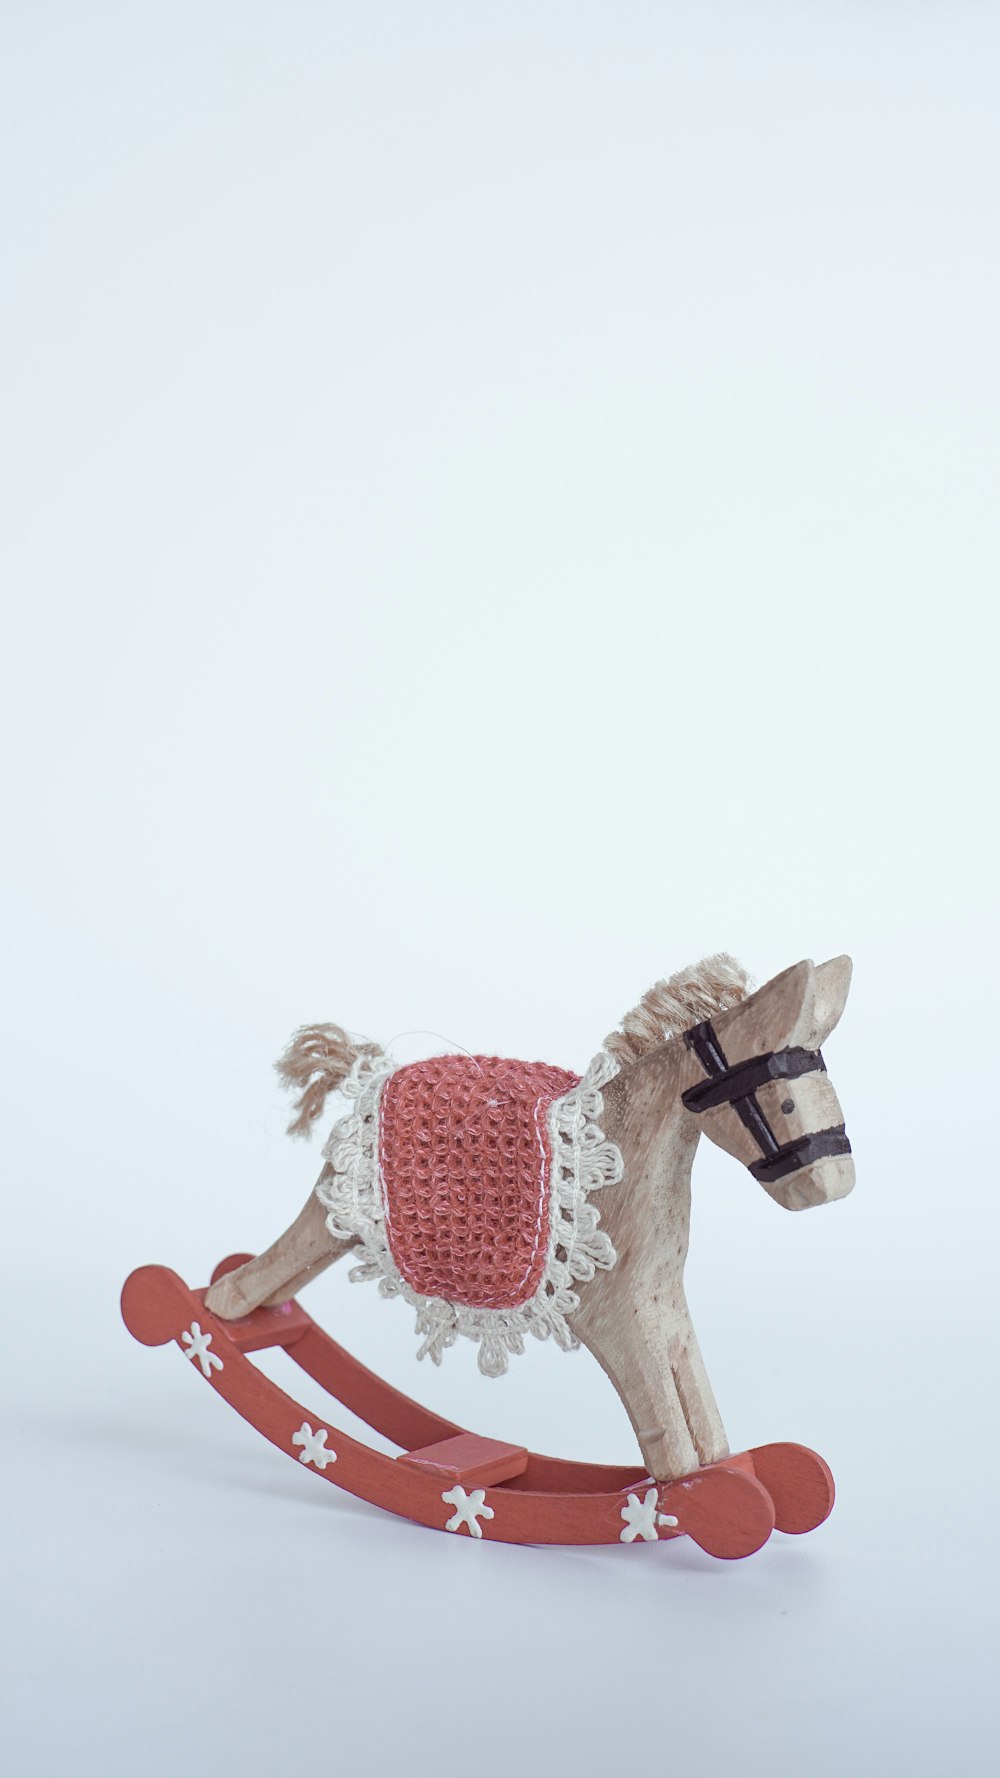 brown and red rocking horse toy